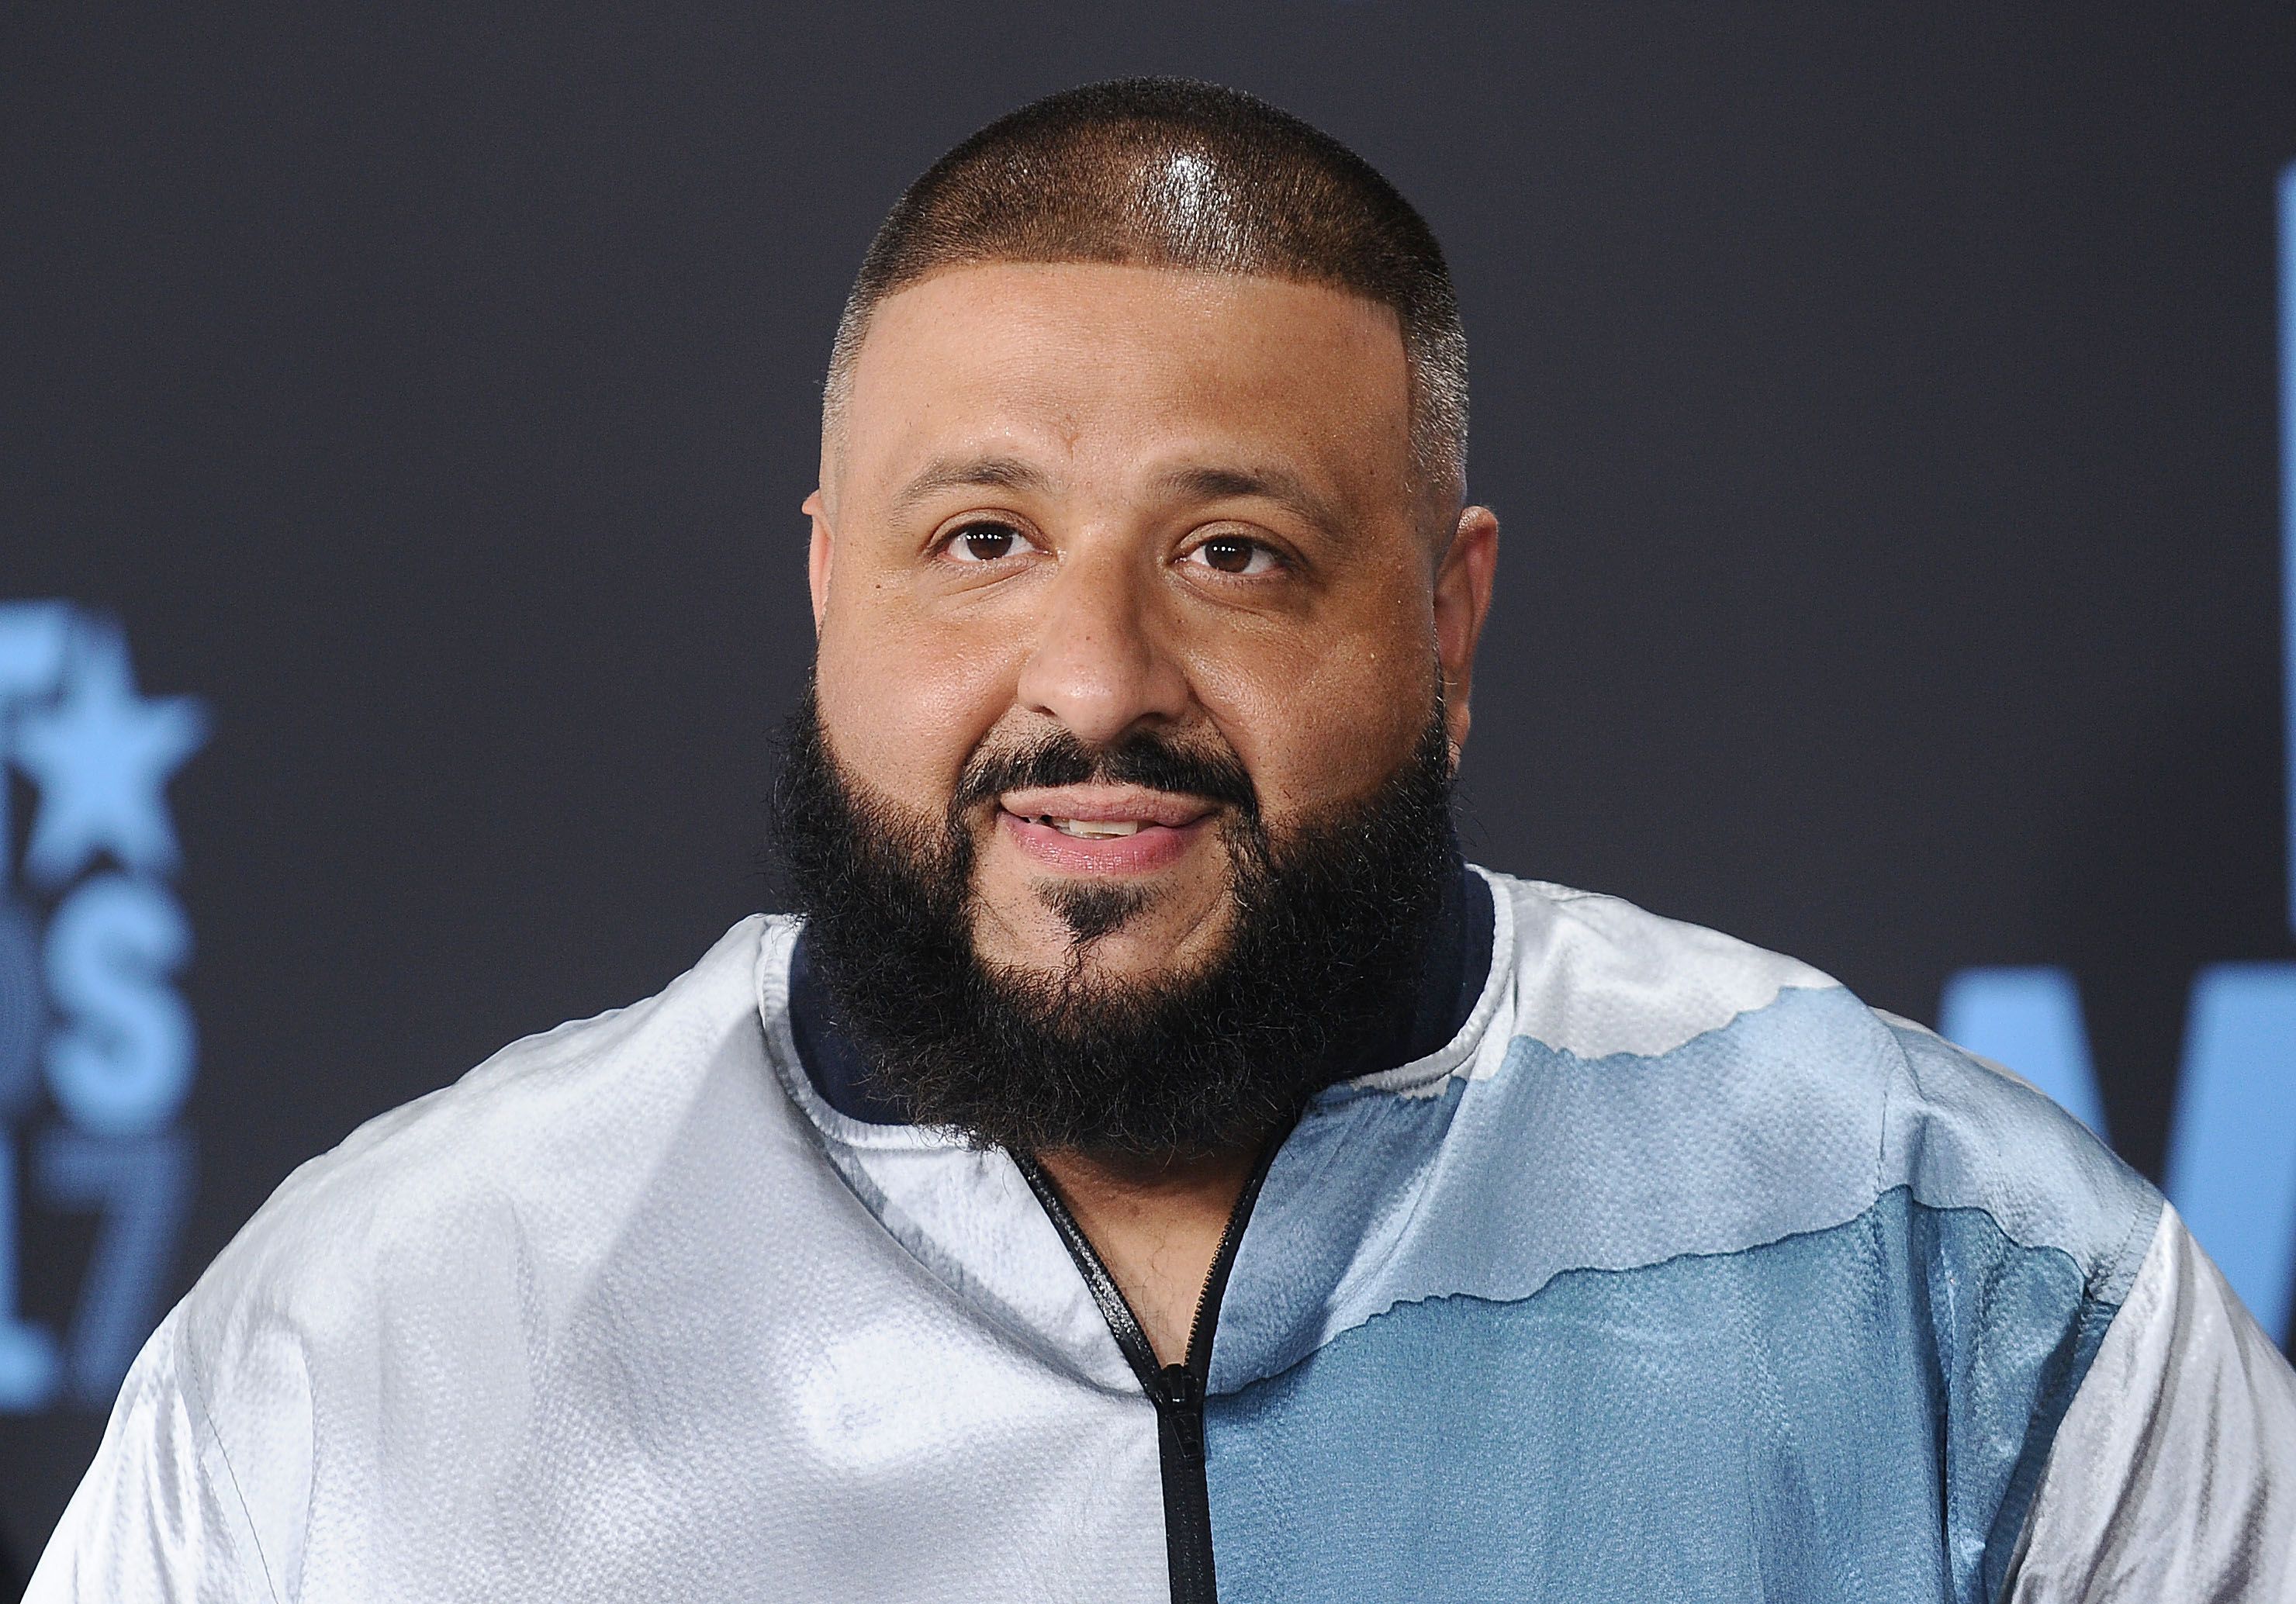 DJ Khaled attends the 2017 BET Awards at Microsoft Theater on June 25, 2017 in Los Angeles, California. | Source: Getty Images